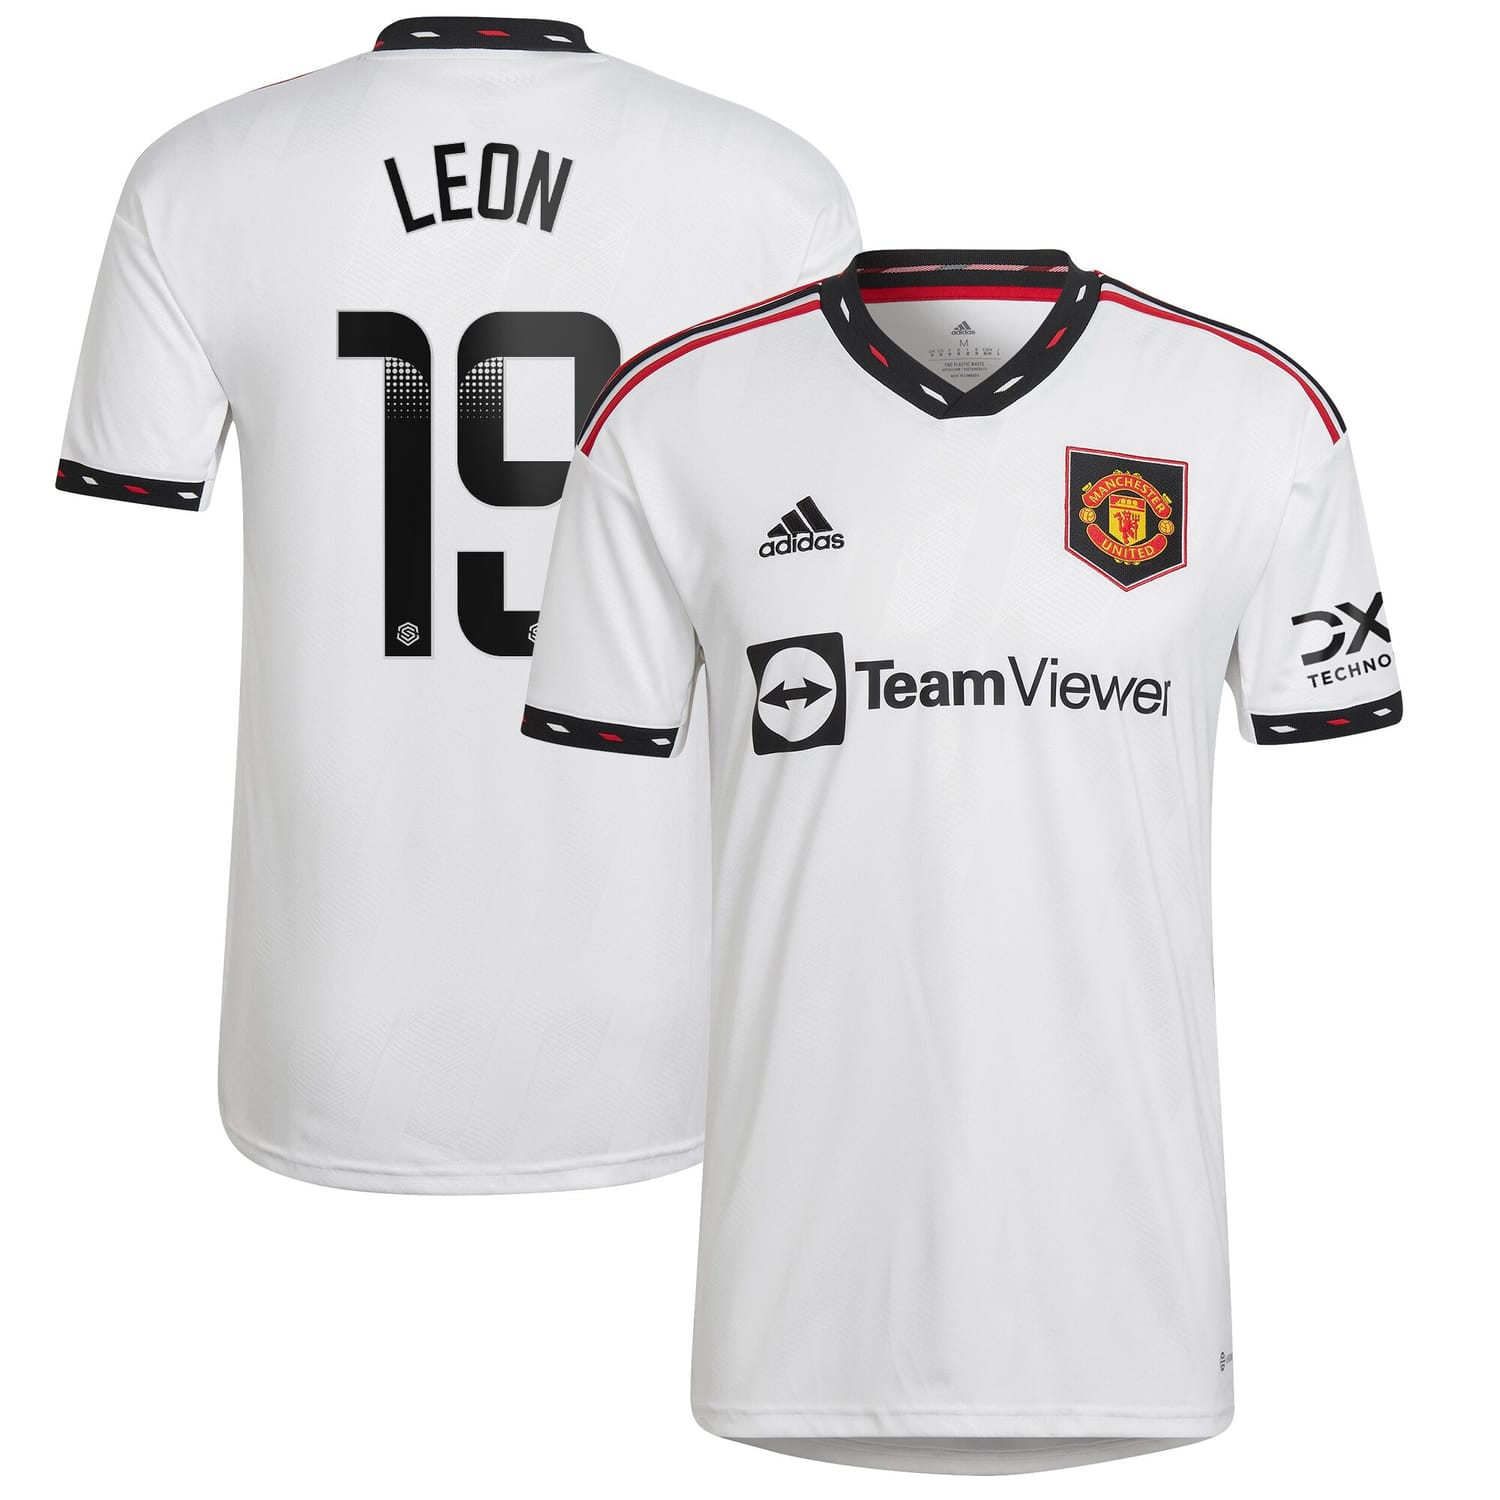 Premier League Manchester United Away WSL Jersey Shirt 2022-23 player Adriana Leon 19 printing for Men